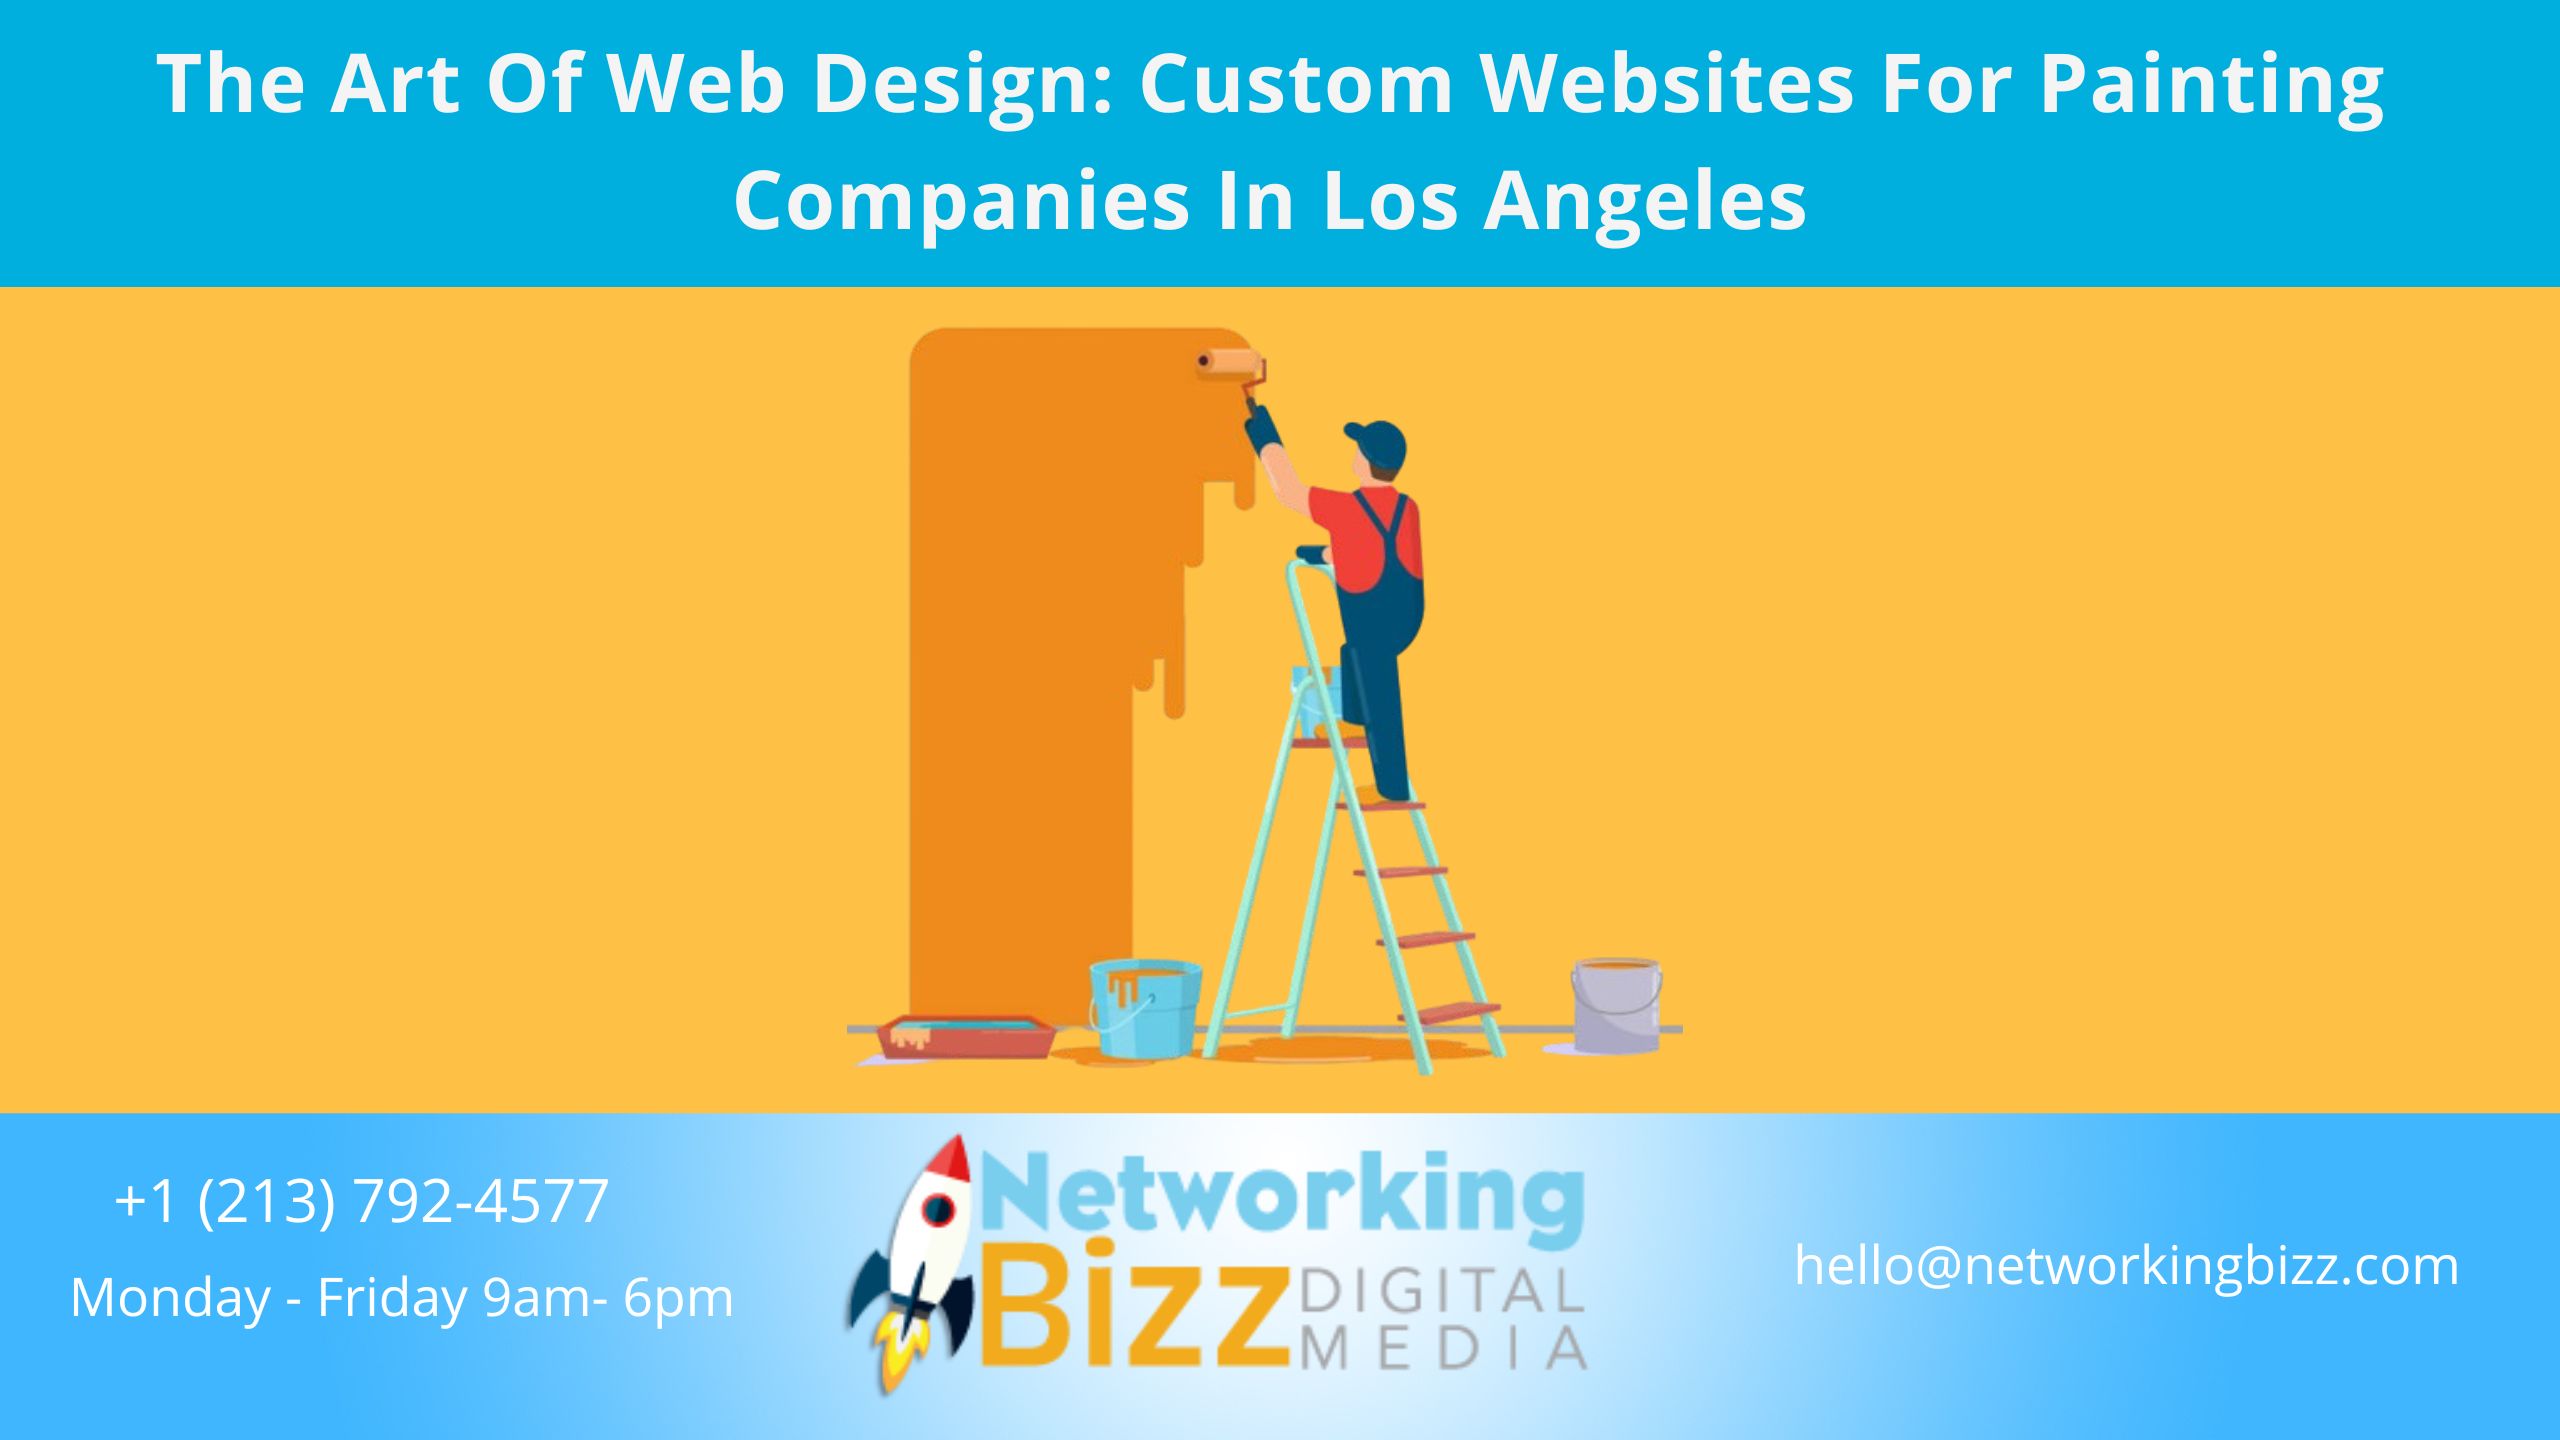 The Art Of Web Design: Custom Websites For Painting Companies In Los Angeles